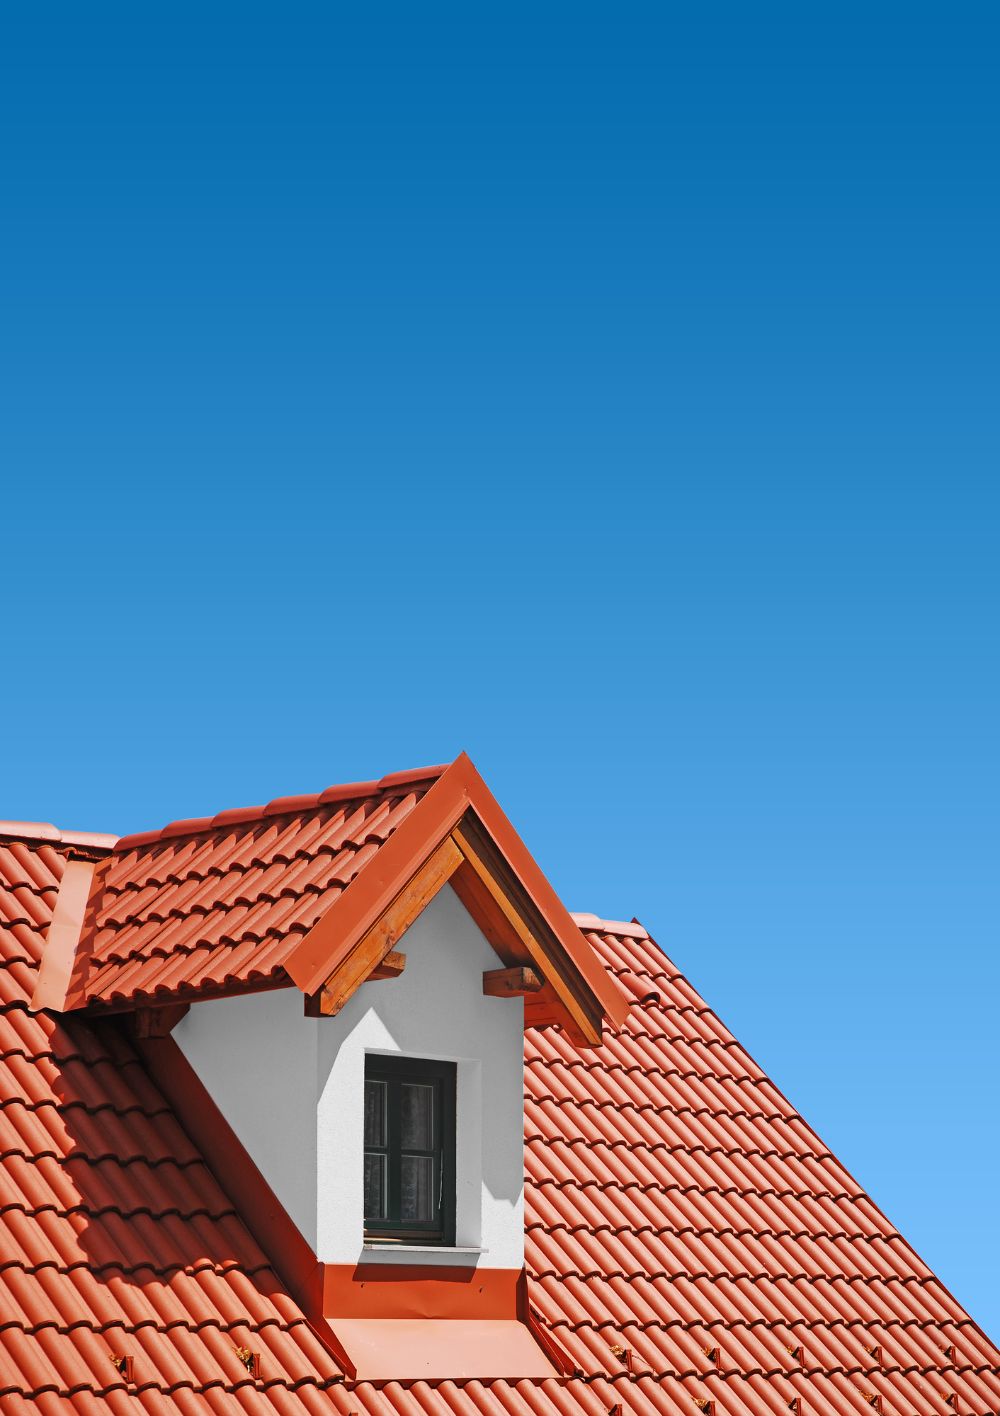 What Are The Benefits of Cleaning Your Roof With No Pressure at All?